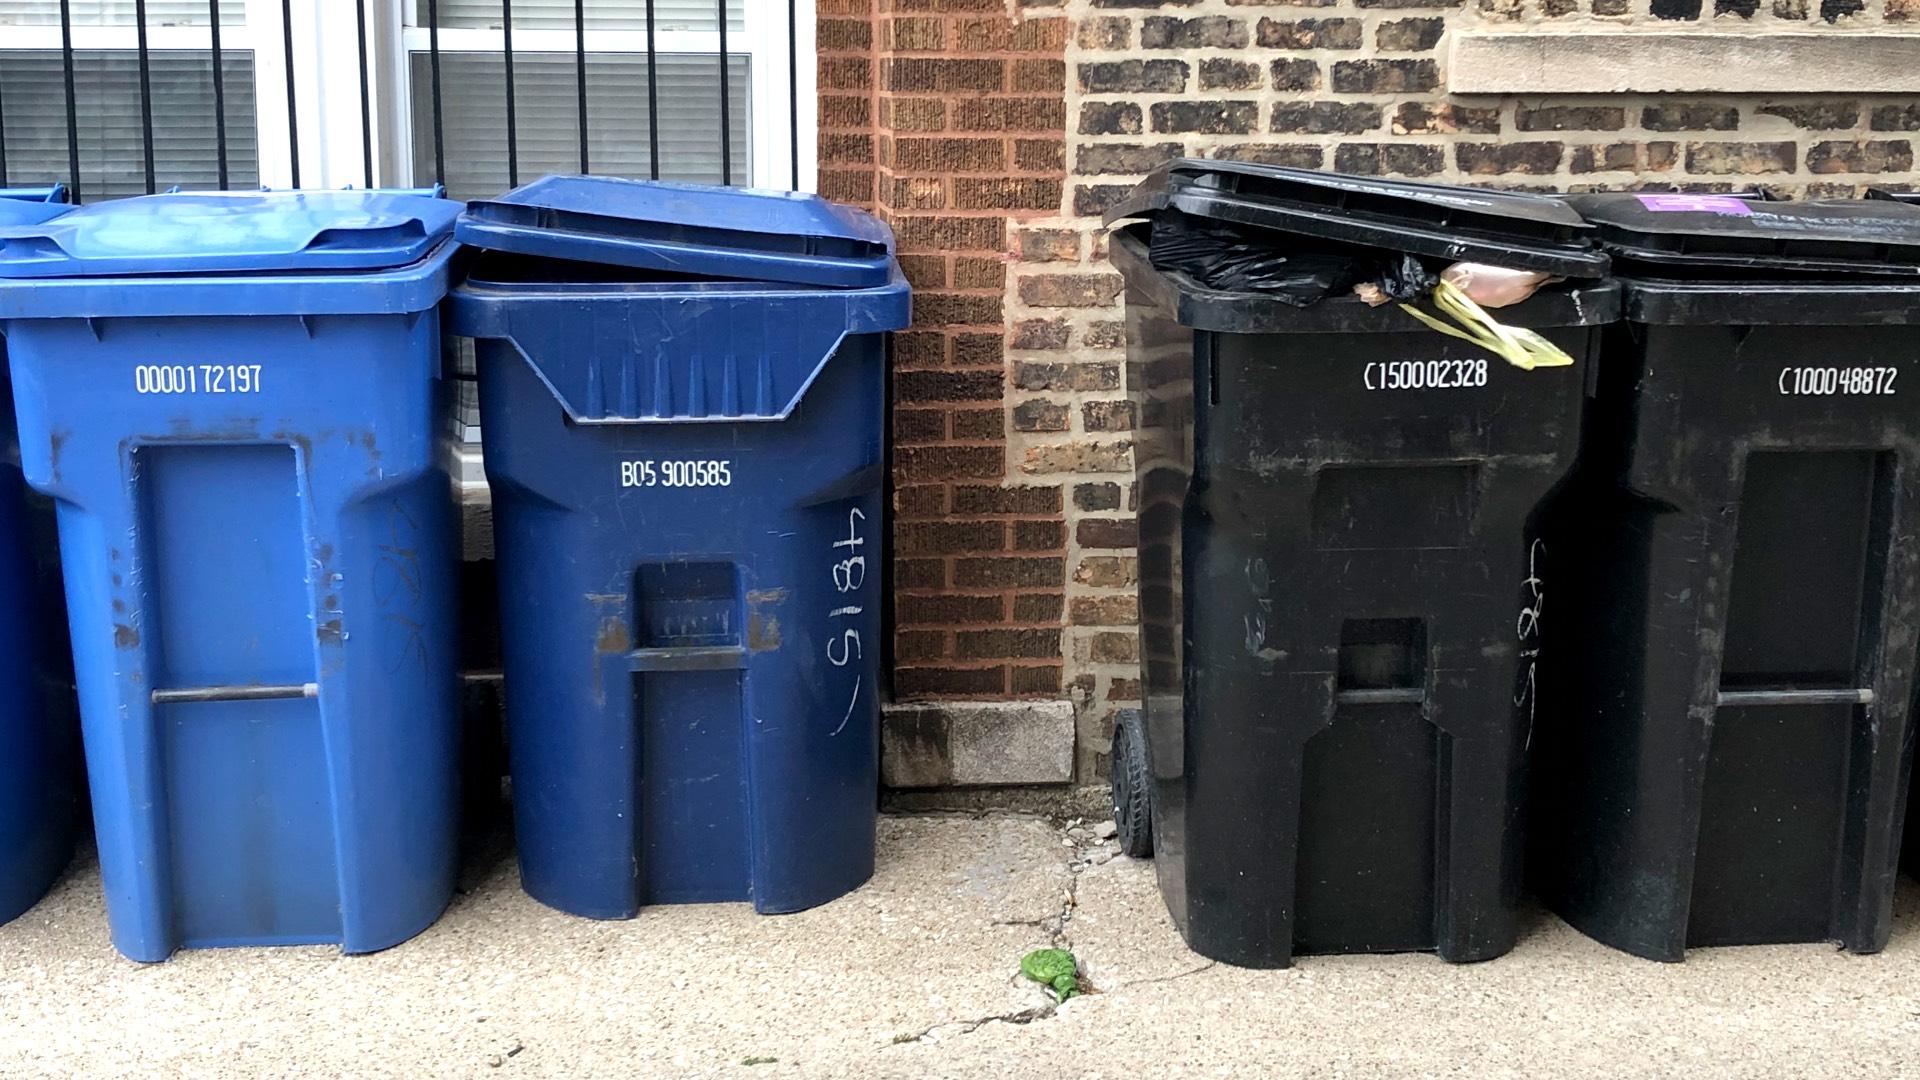 Chicago’s black and blue carts have been the city’s waste management workhorses. (Patty Wetli / WTTW News)